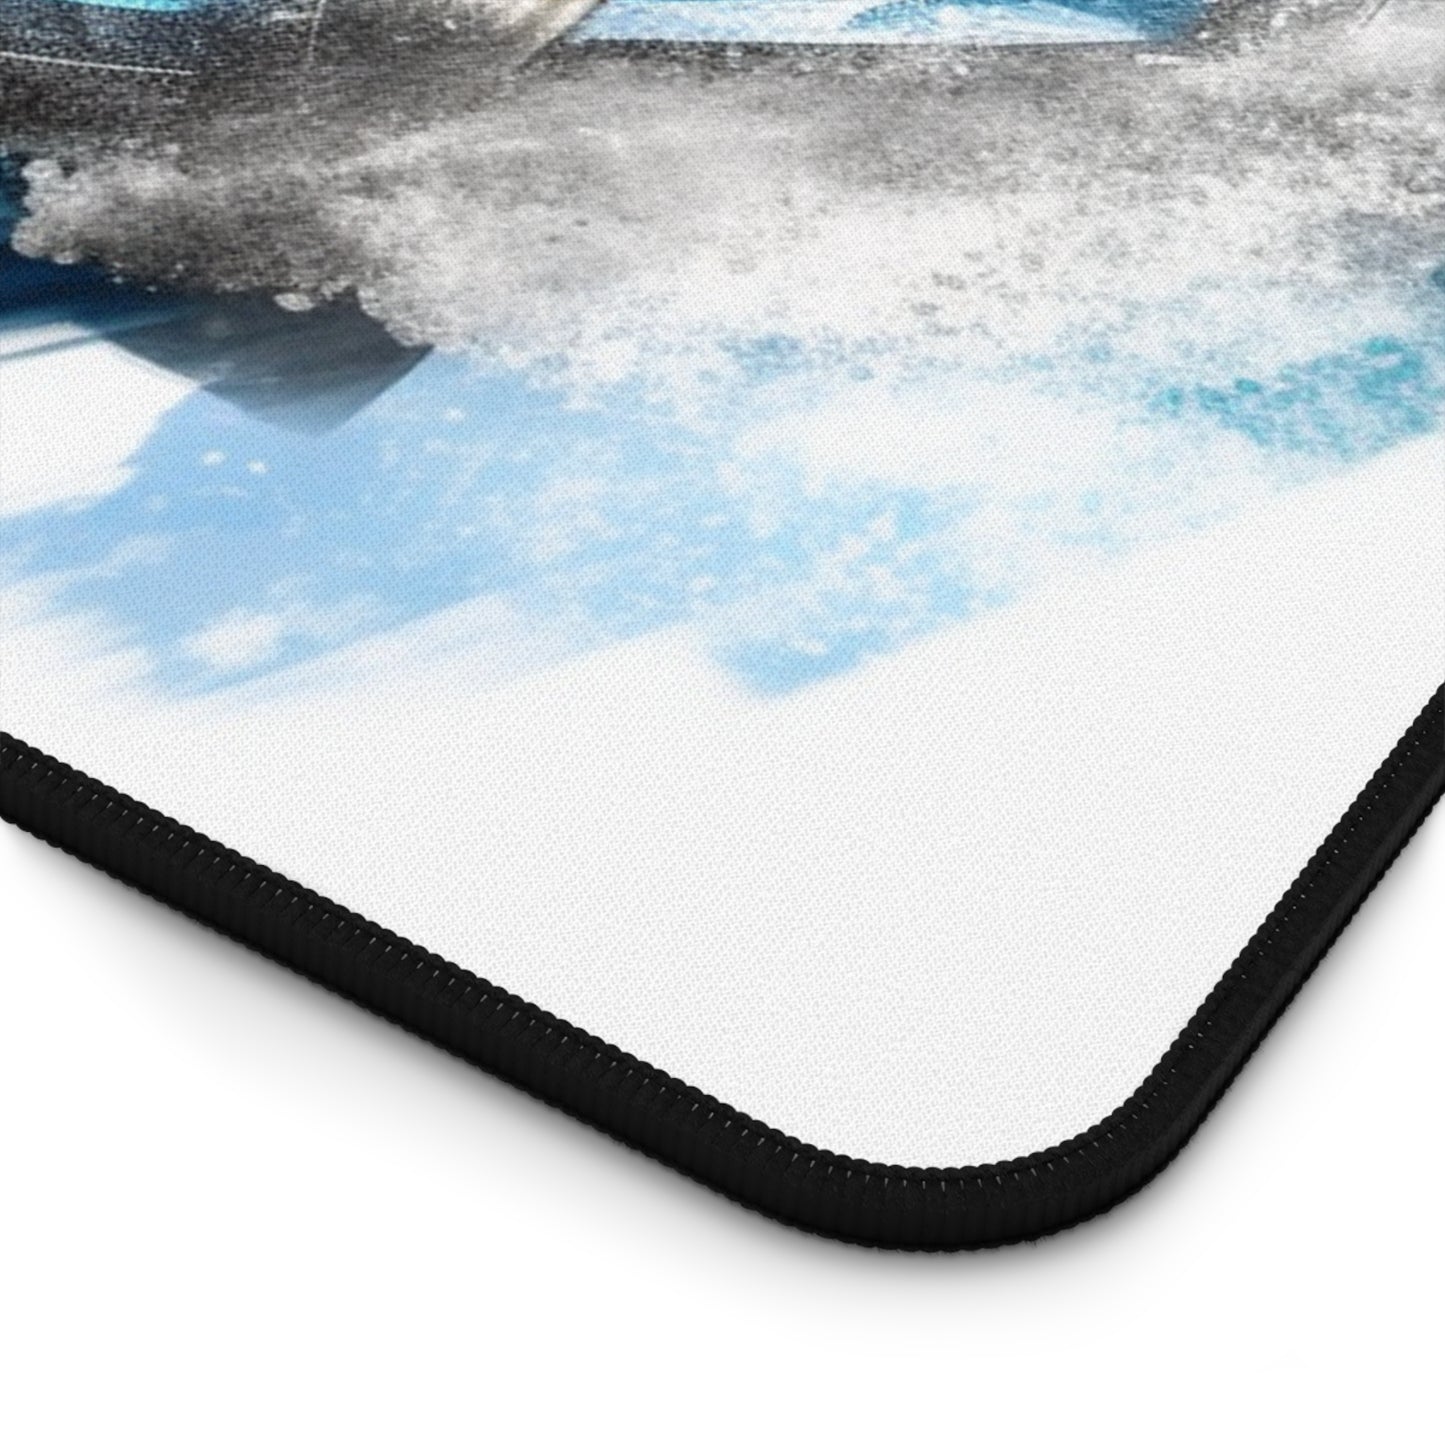 Desk Mat 918 Spyder with white background driving fast on water 3